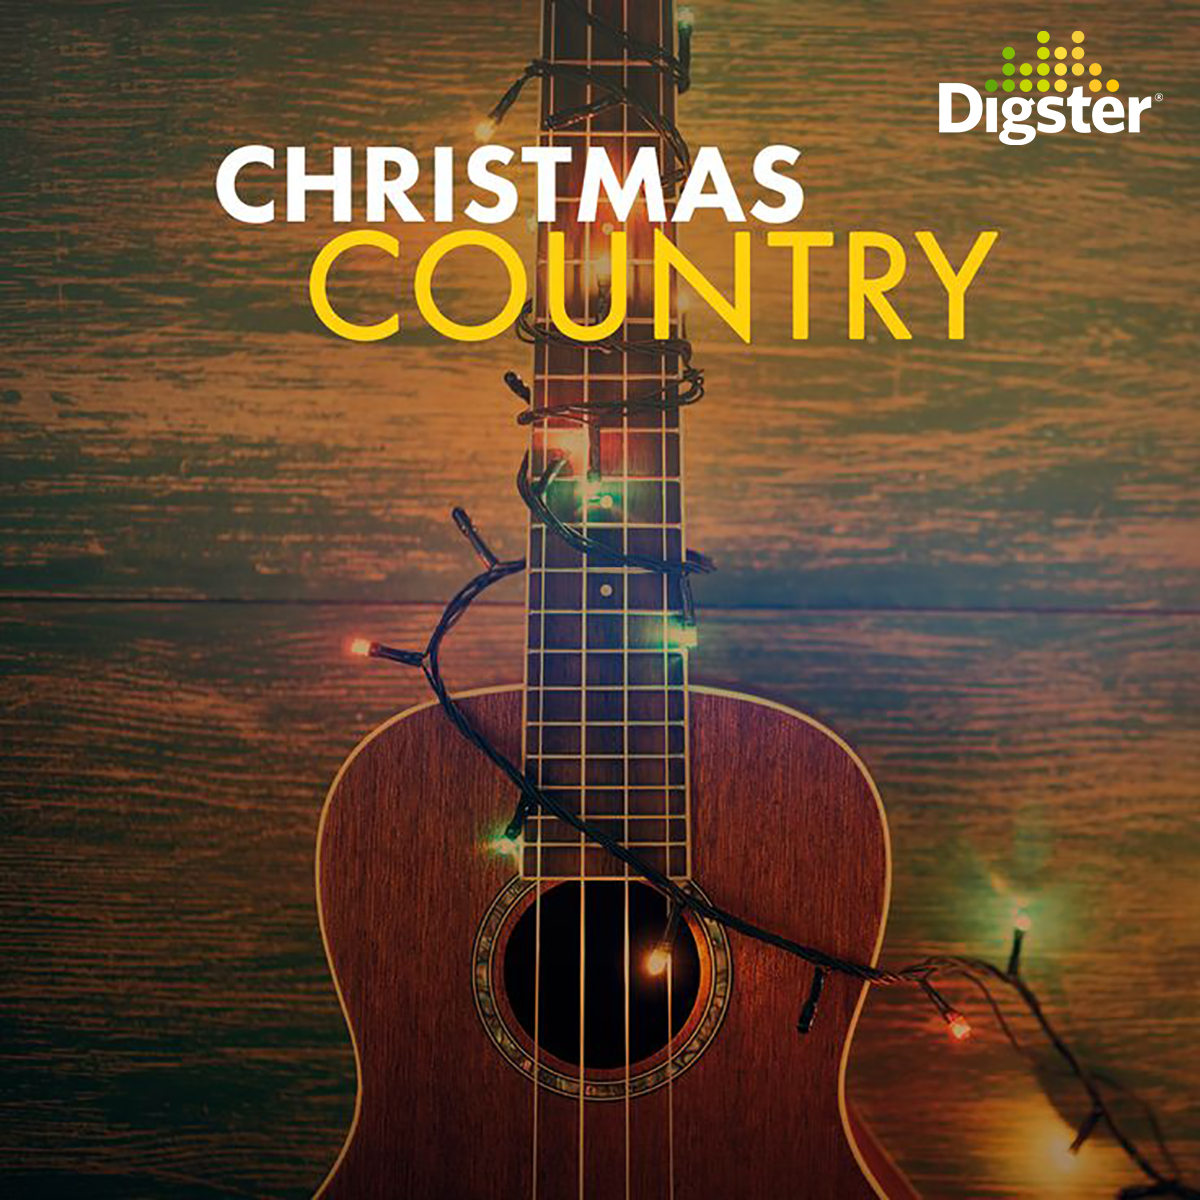 Digster Christmas Country